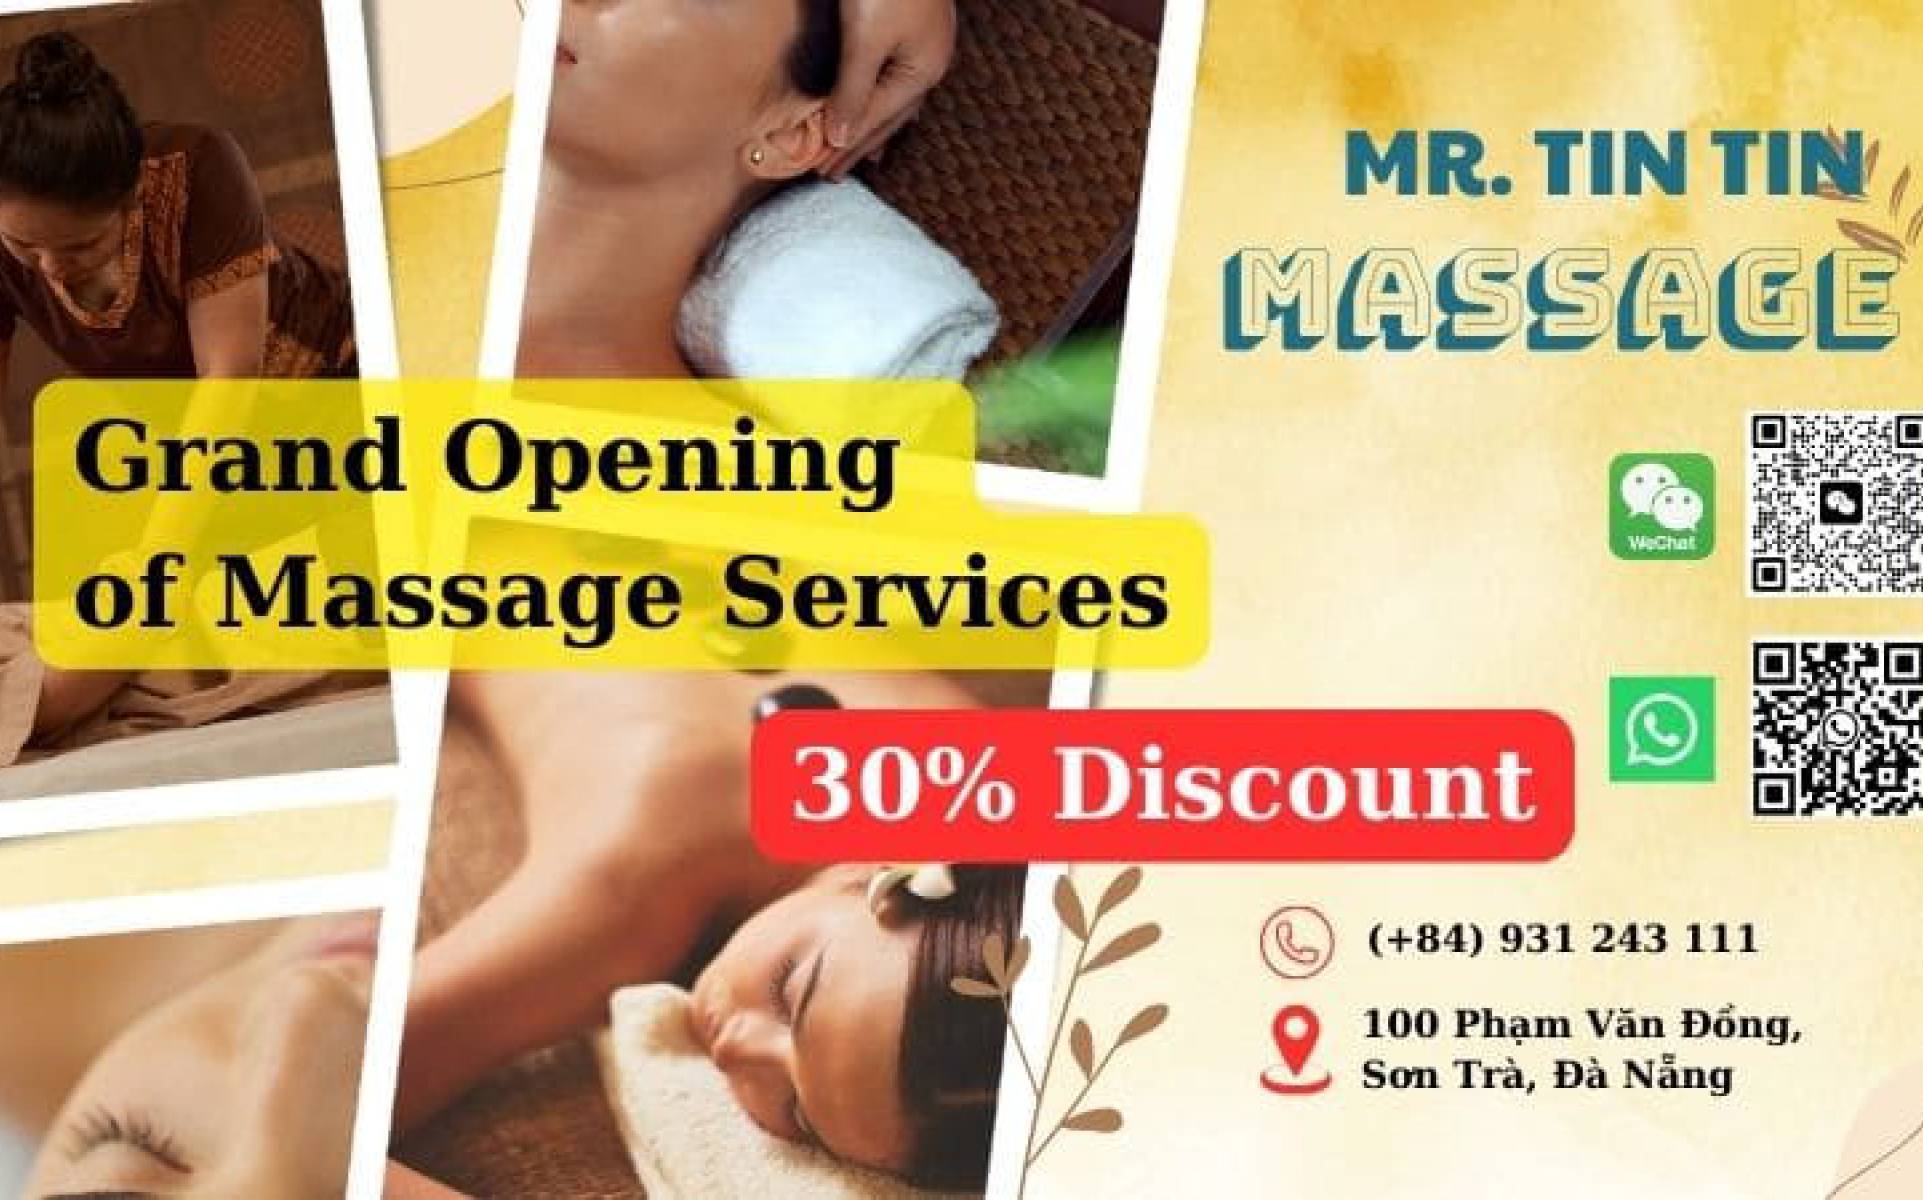 Grand Opening of Massage Services in Da Nang: 30% Discount